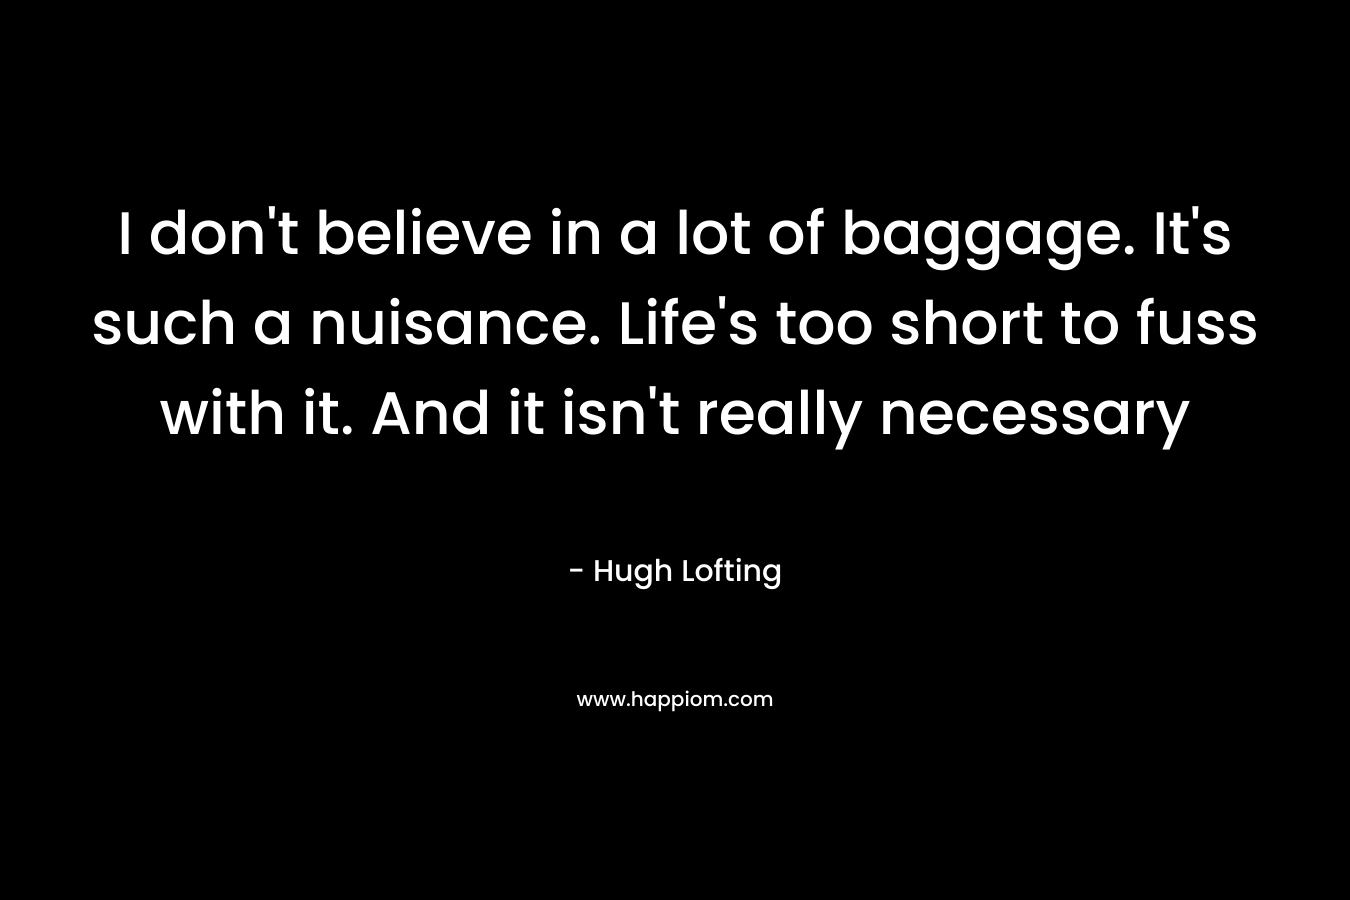 I don’t believe in a lot of baggage. It’s such a nuisance. Life’s too short to fuss with it. And it isn’t really necessary – Hugh Lofting